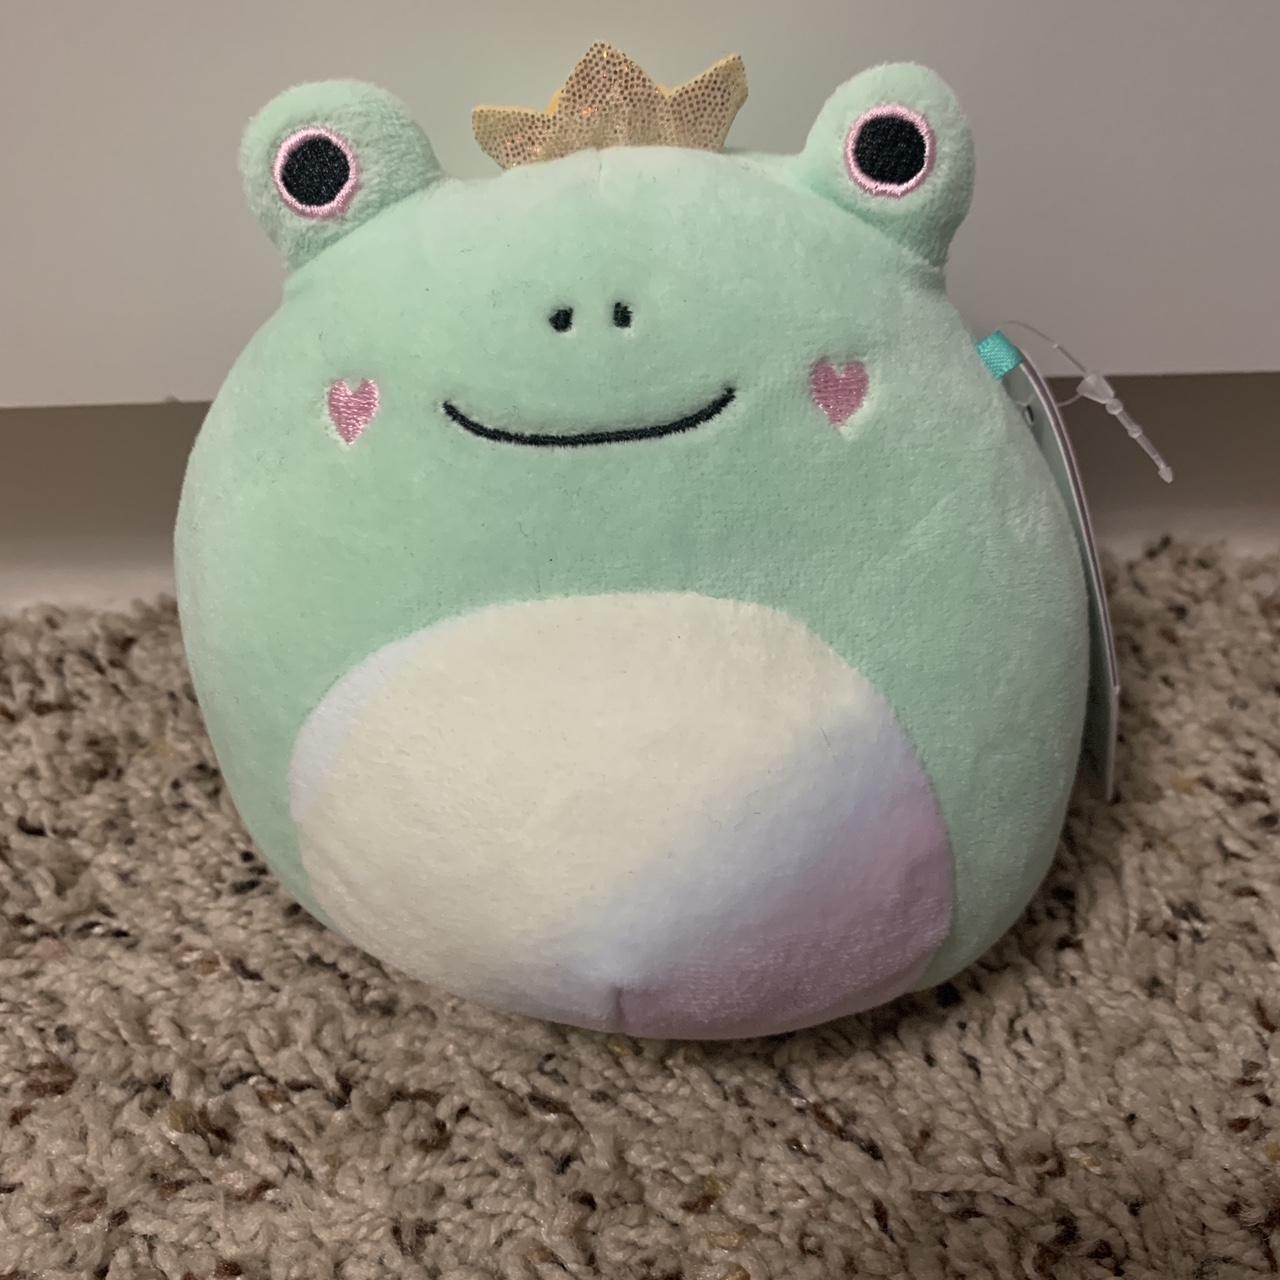 Introducing the adorable SQUISHMALLOWS 5 FENRA FROG